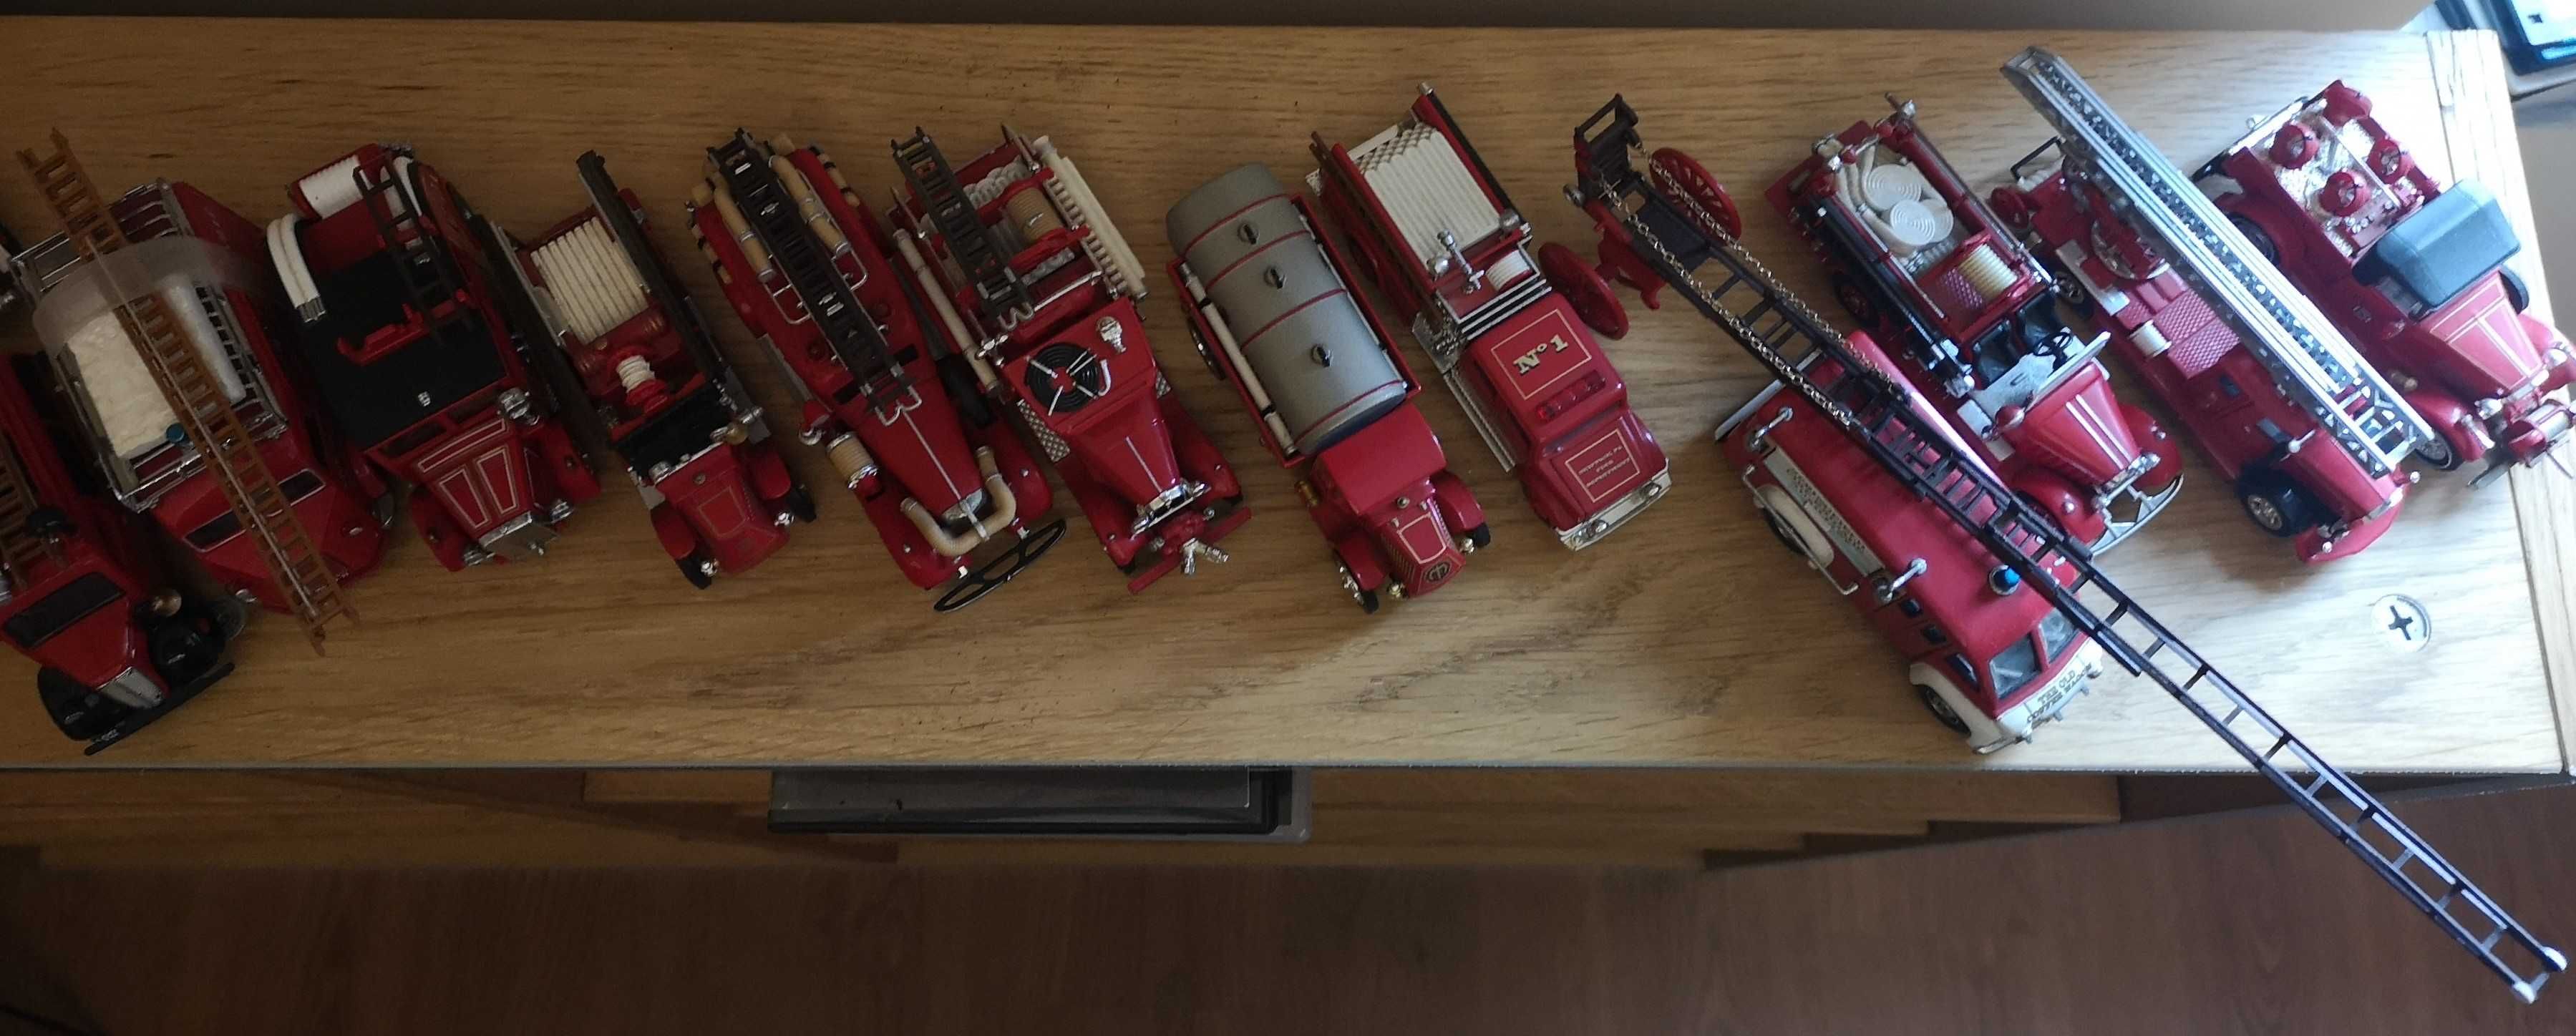 Matchbox Models of Yesteryear Fire engine